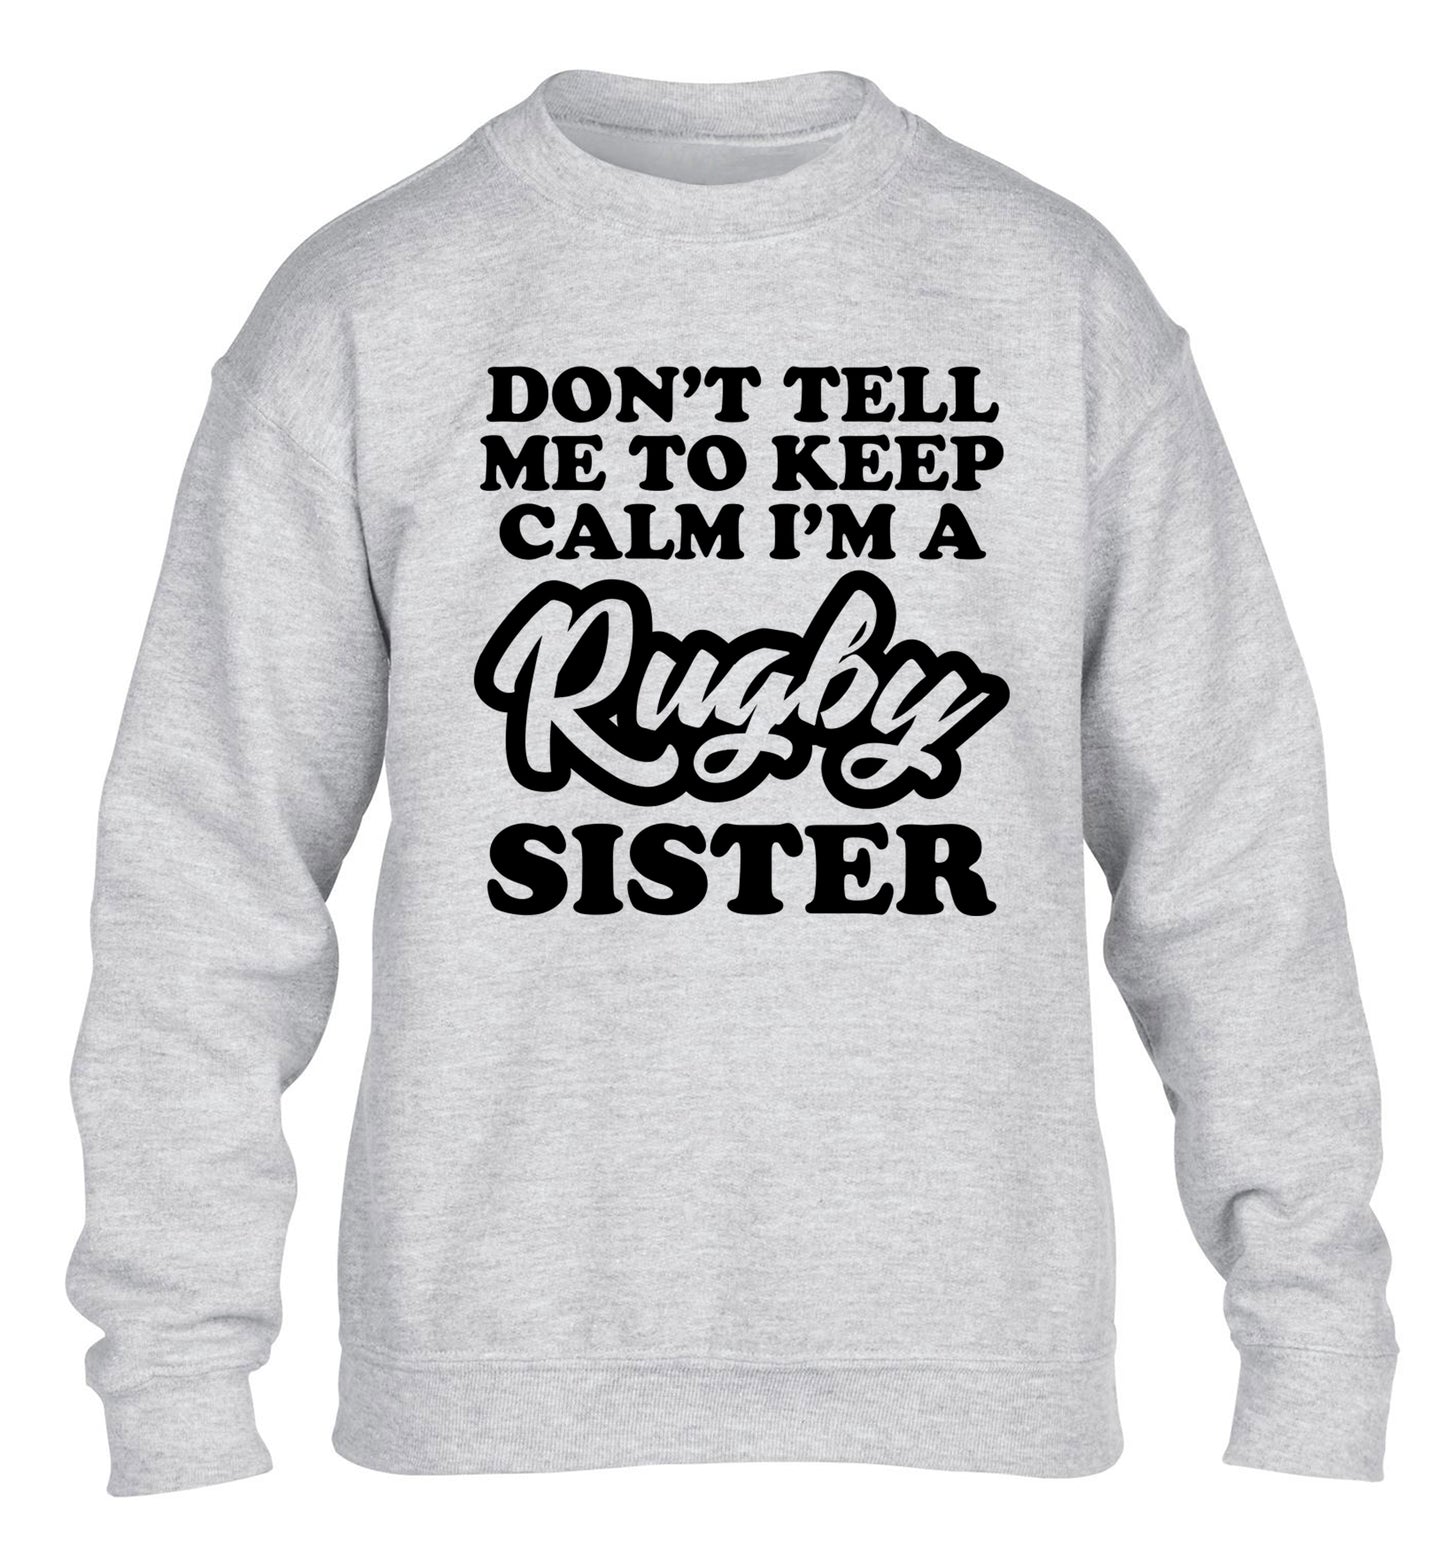 Don't tell me keep calm I'm a rugby sister children's grey sweater 12-13 Years